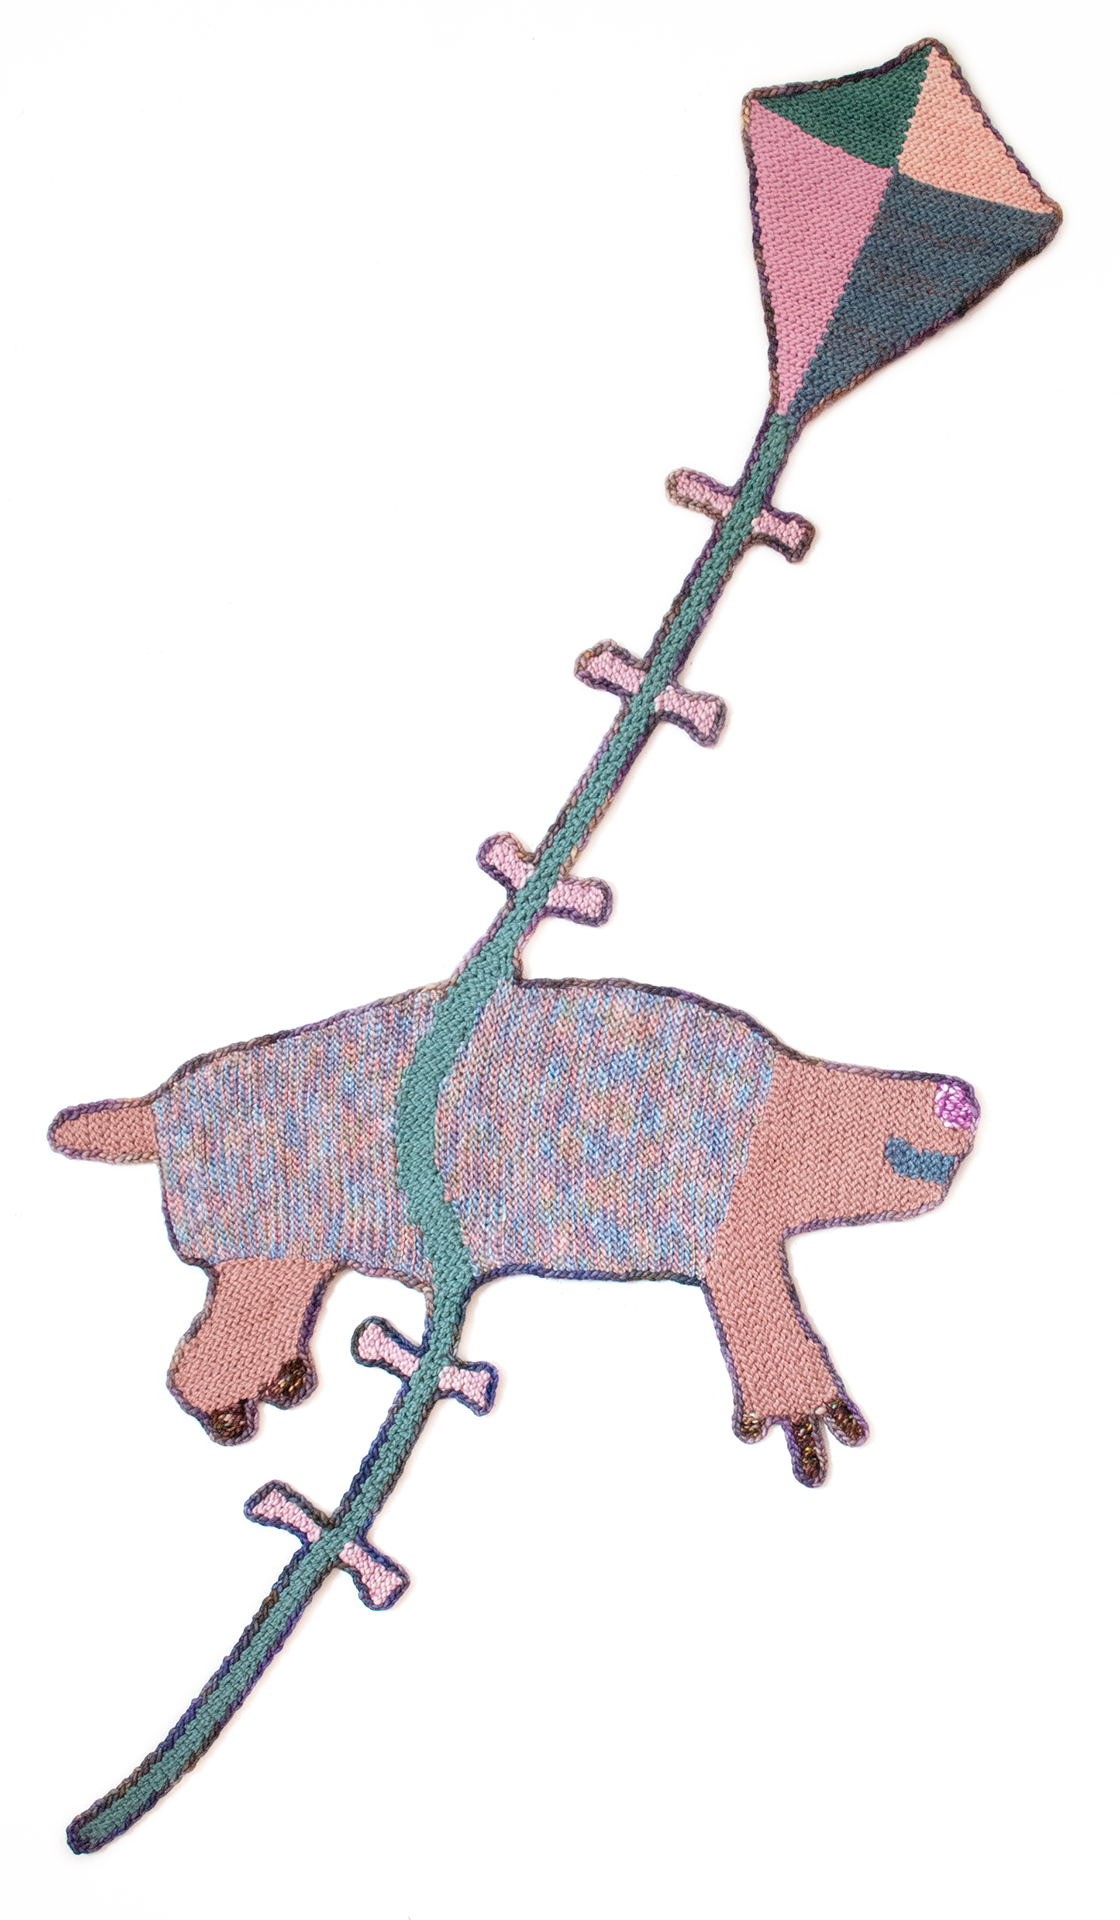 Pink crocheted animal  being flown by a kite